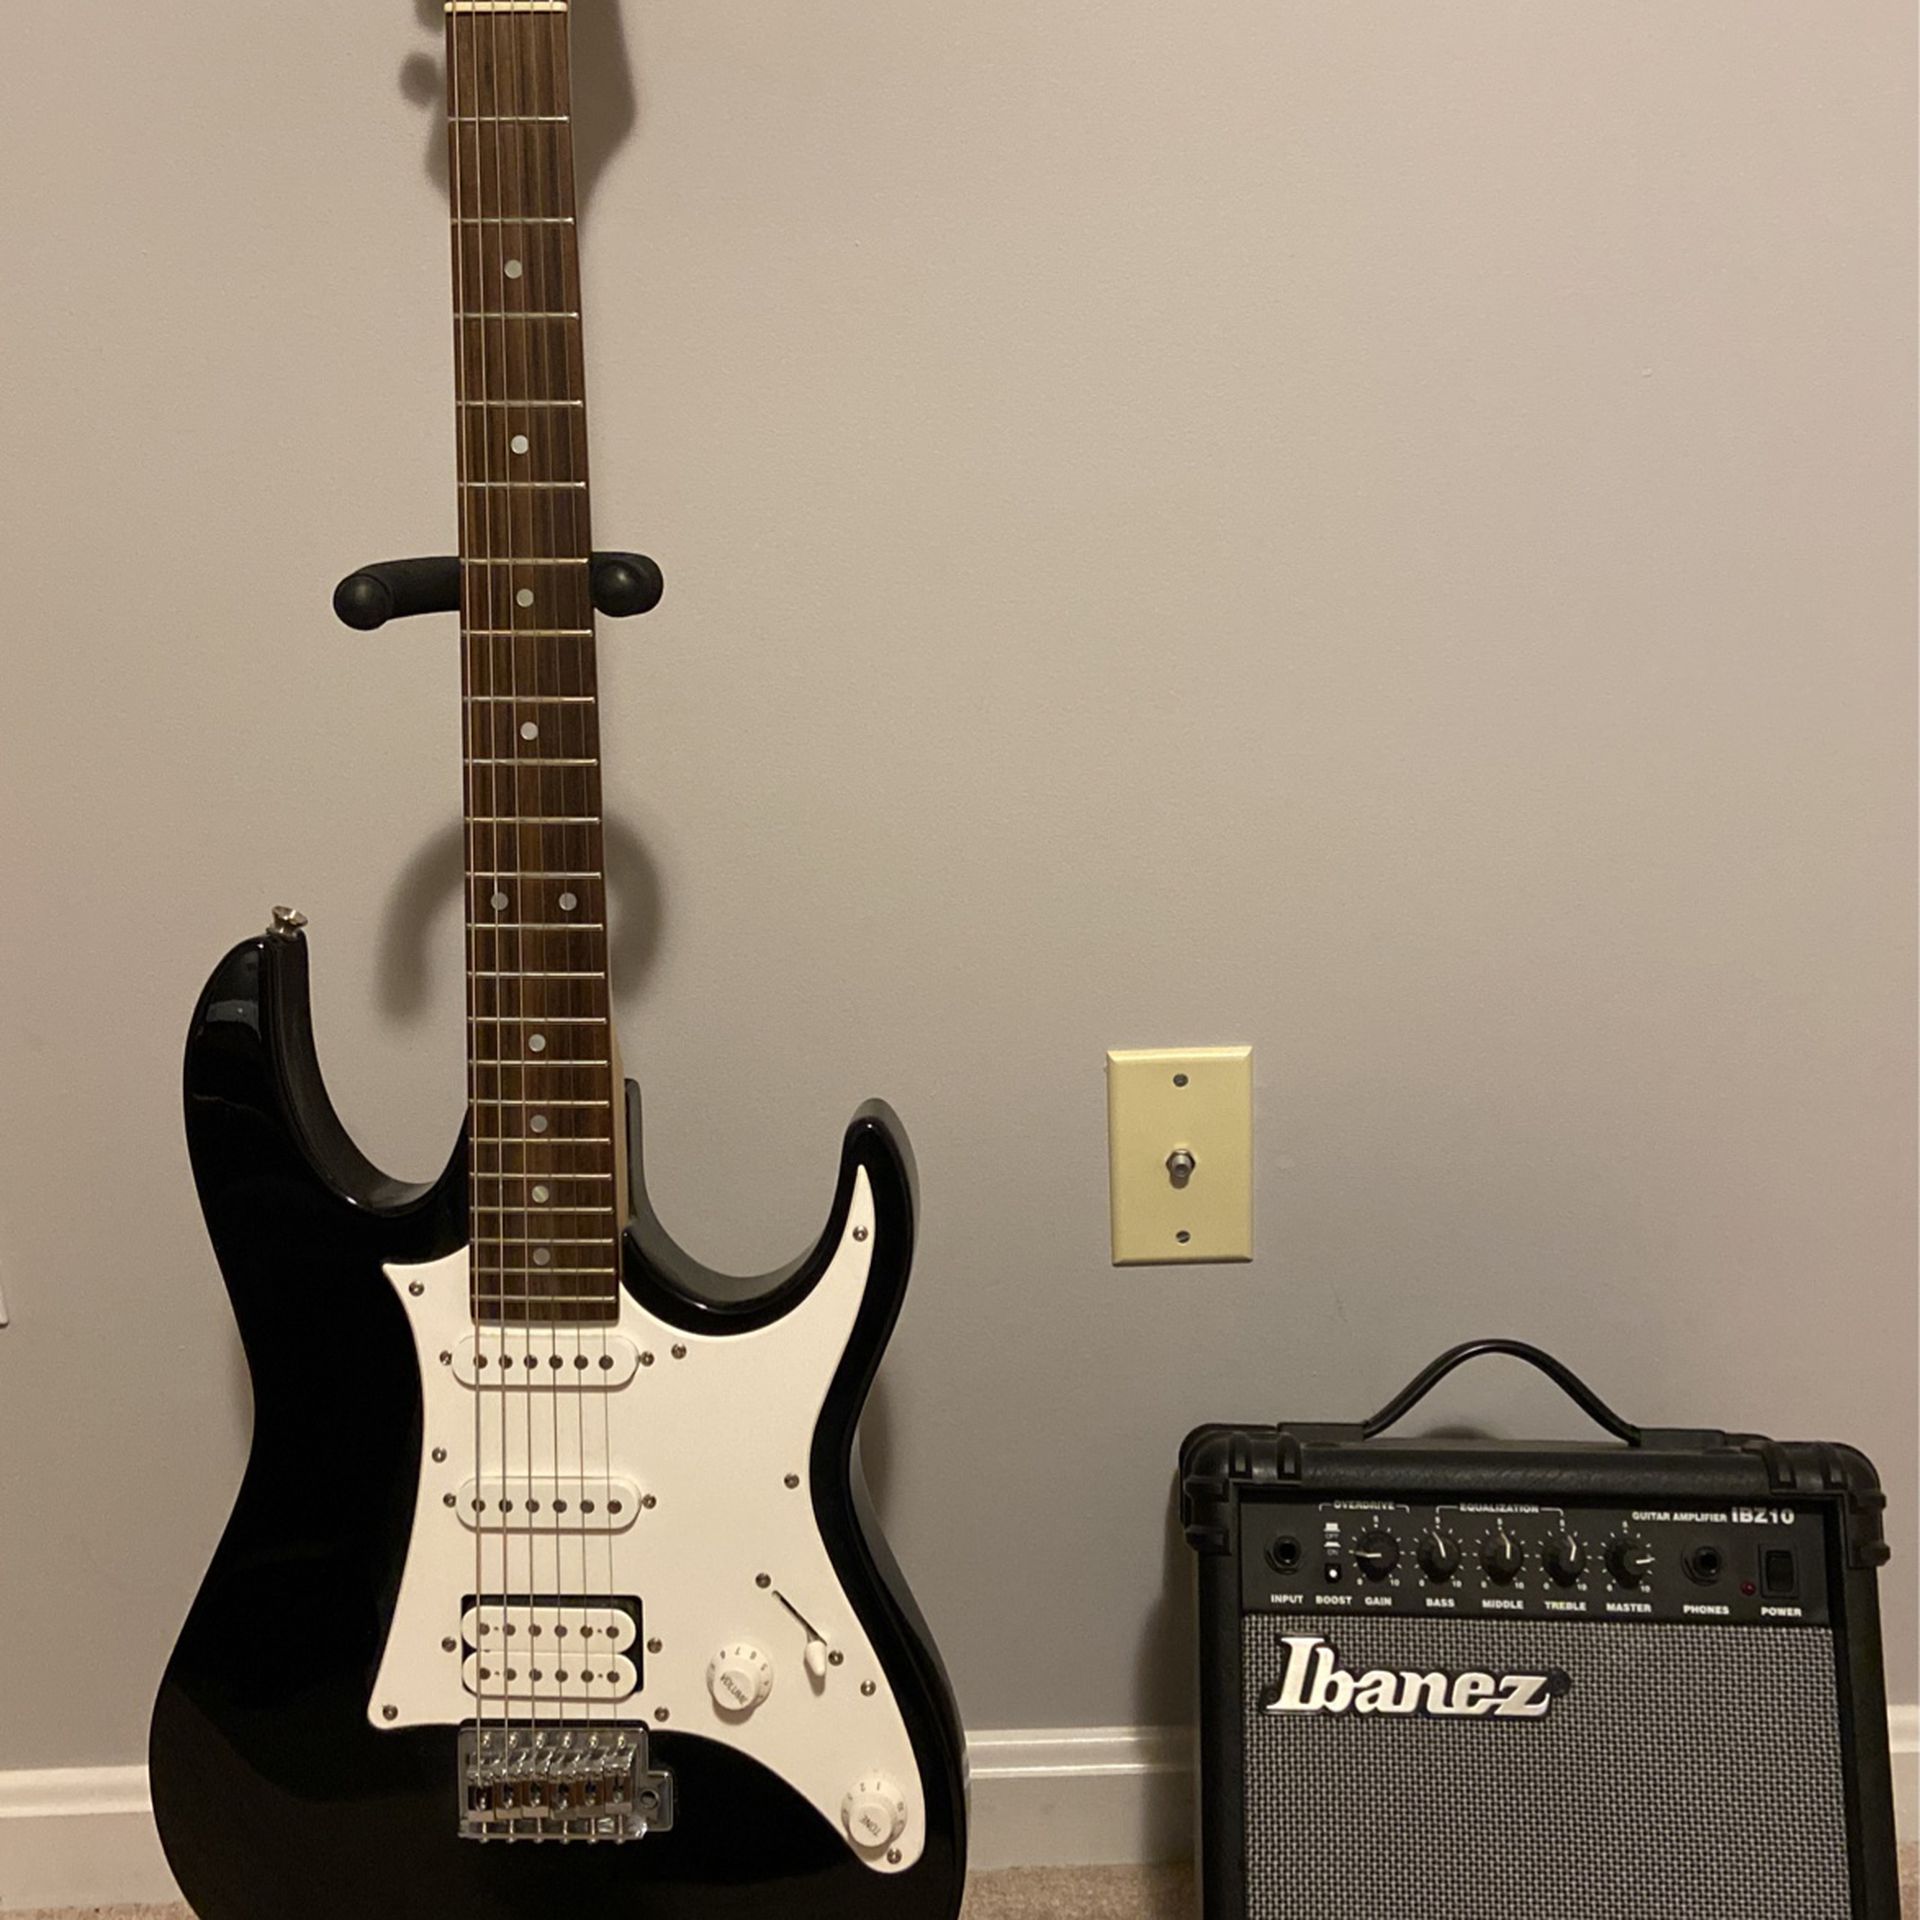 Ibanez  Guitar and Amp With Strap, Tuner, etc.